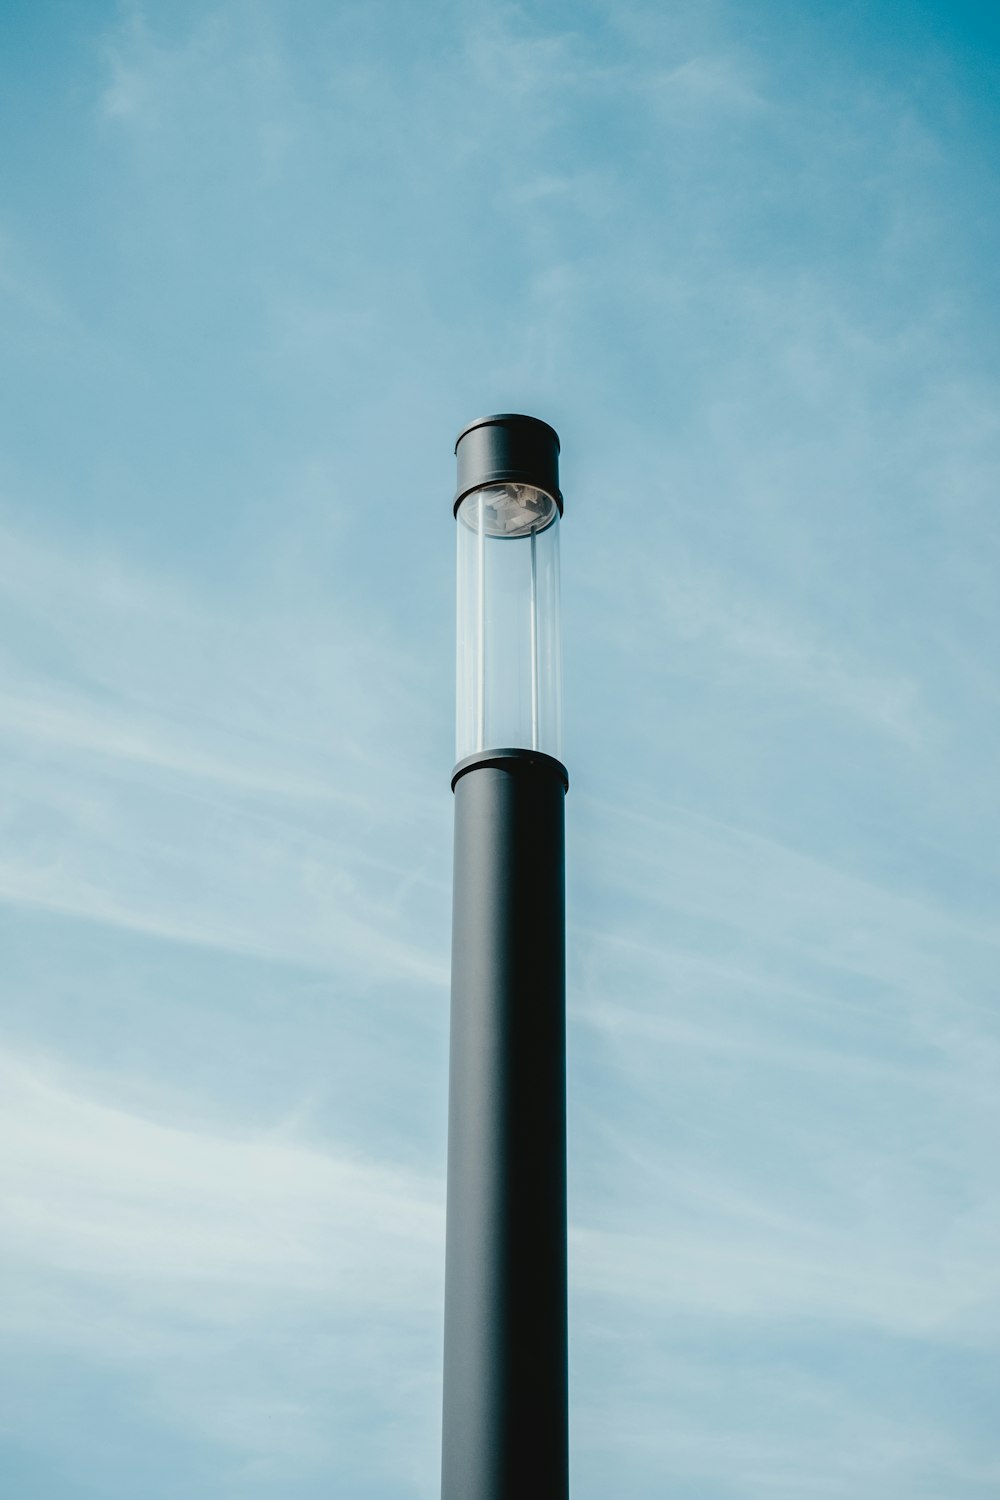 cylindrical black device under cloudy sky